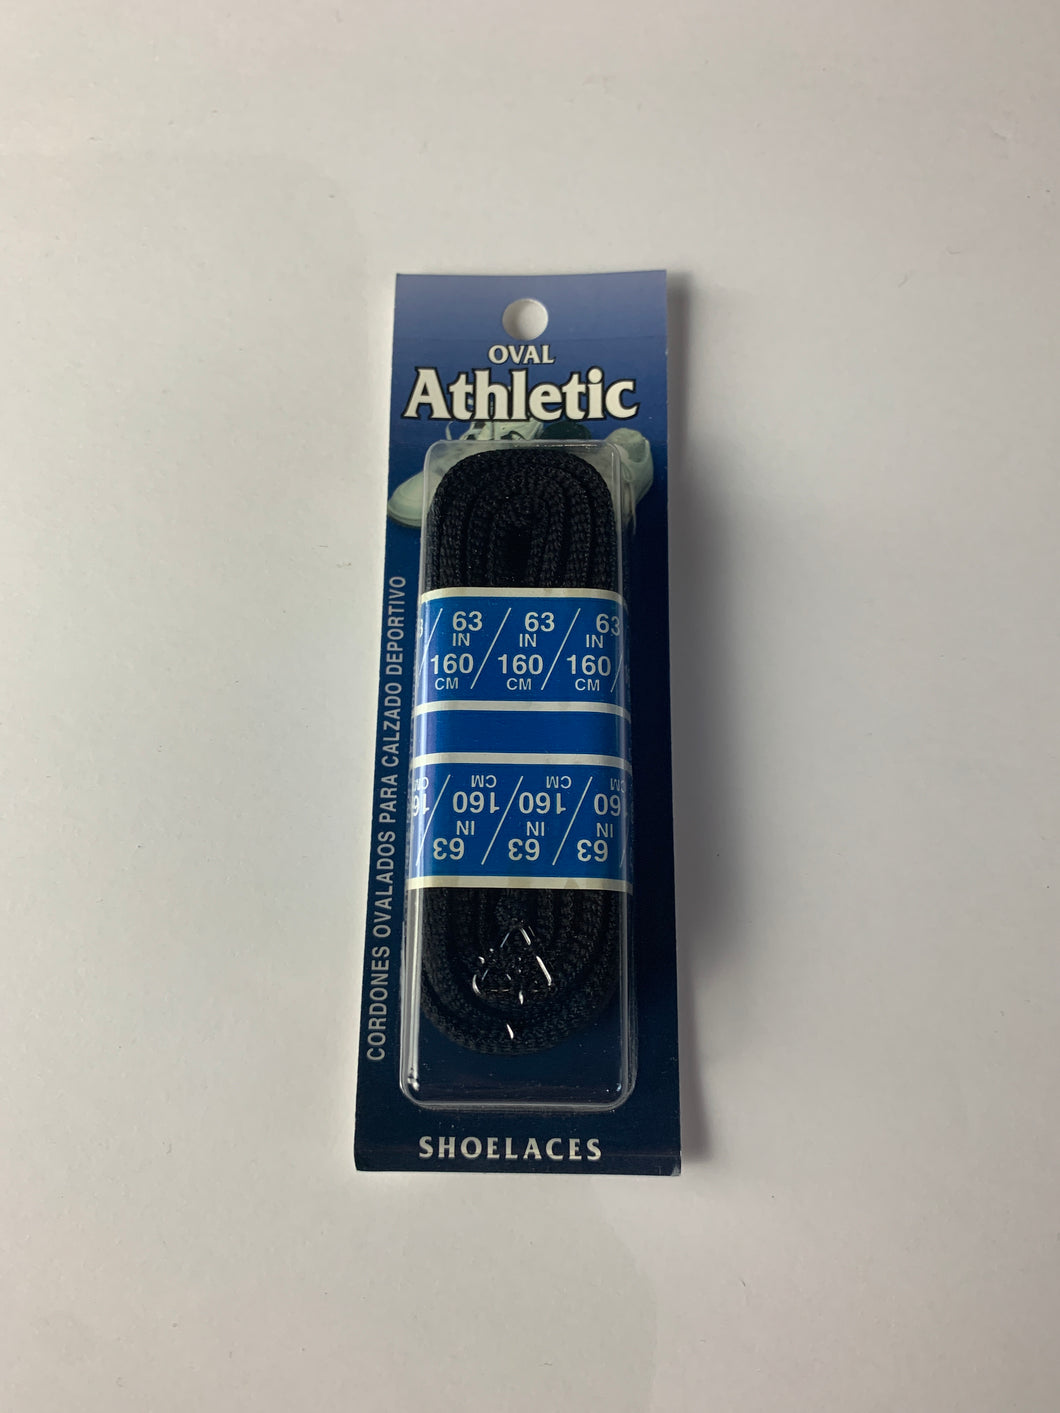 Black Laces - Oval Athletic - 63